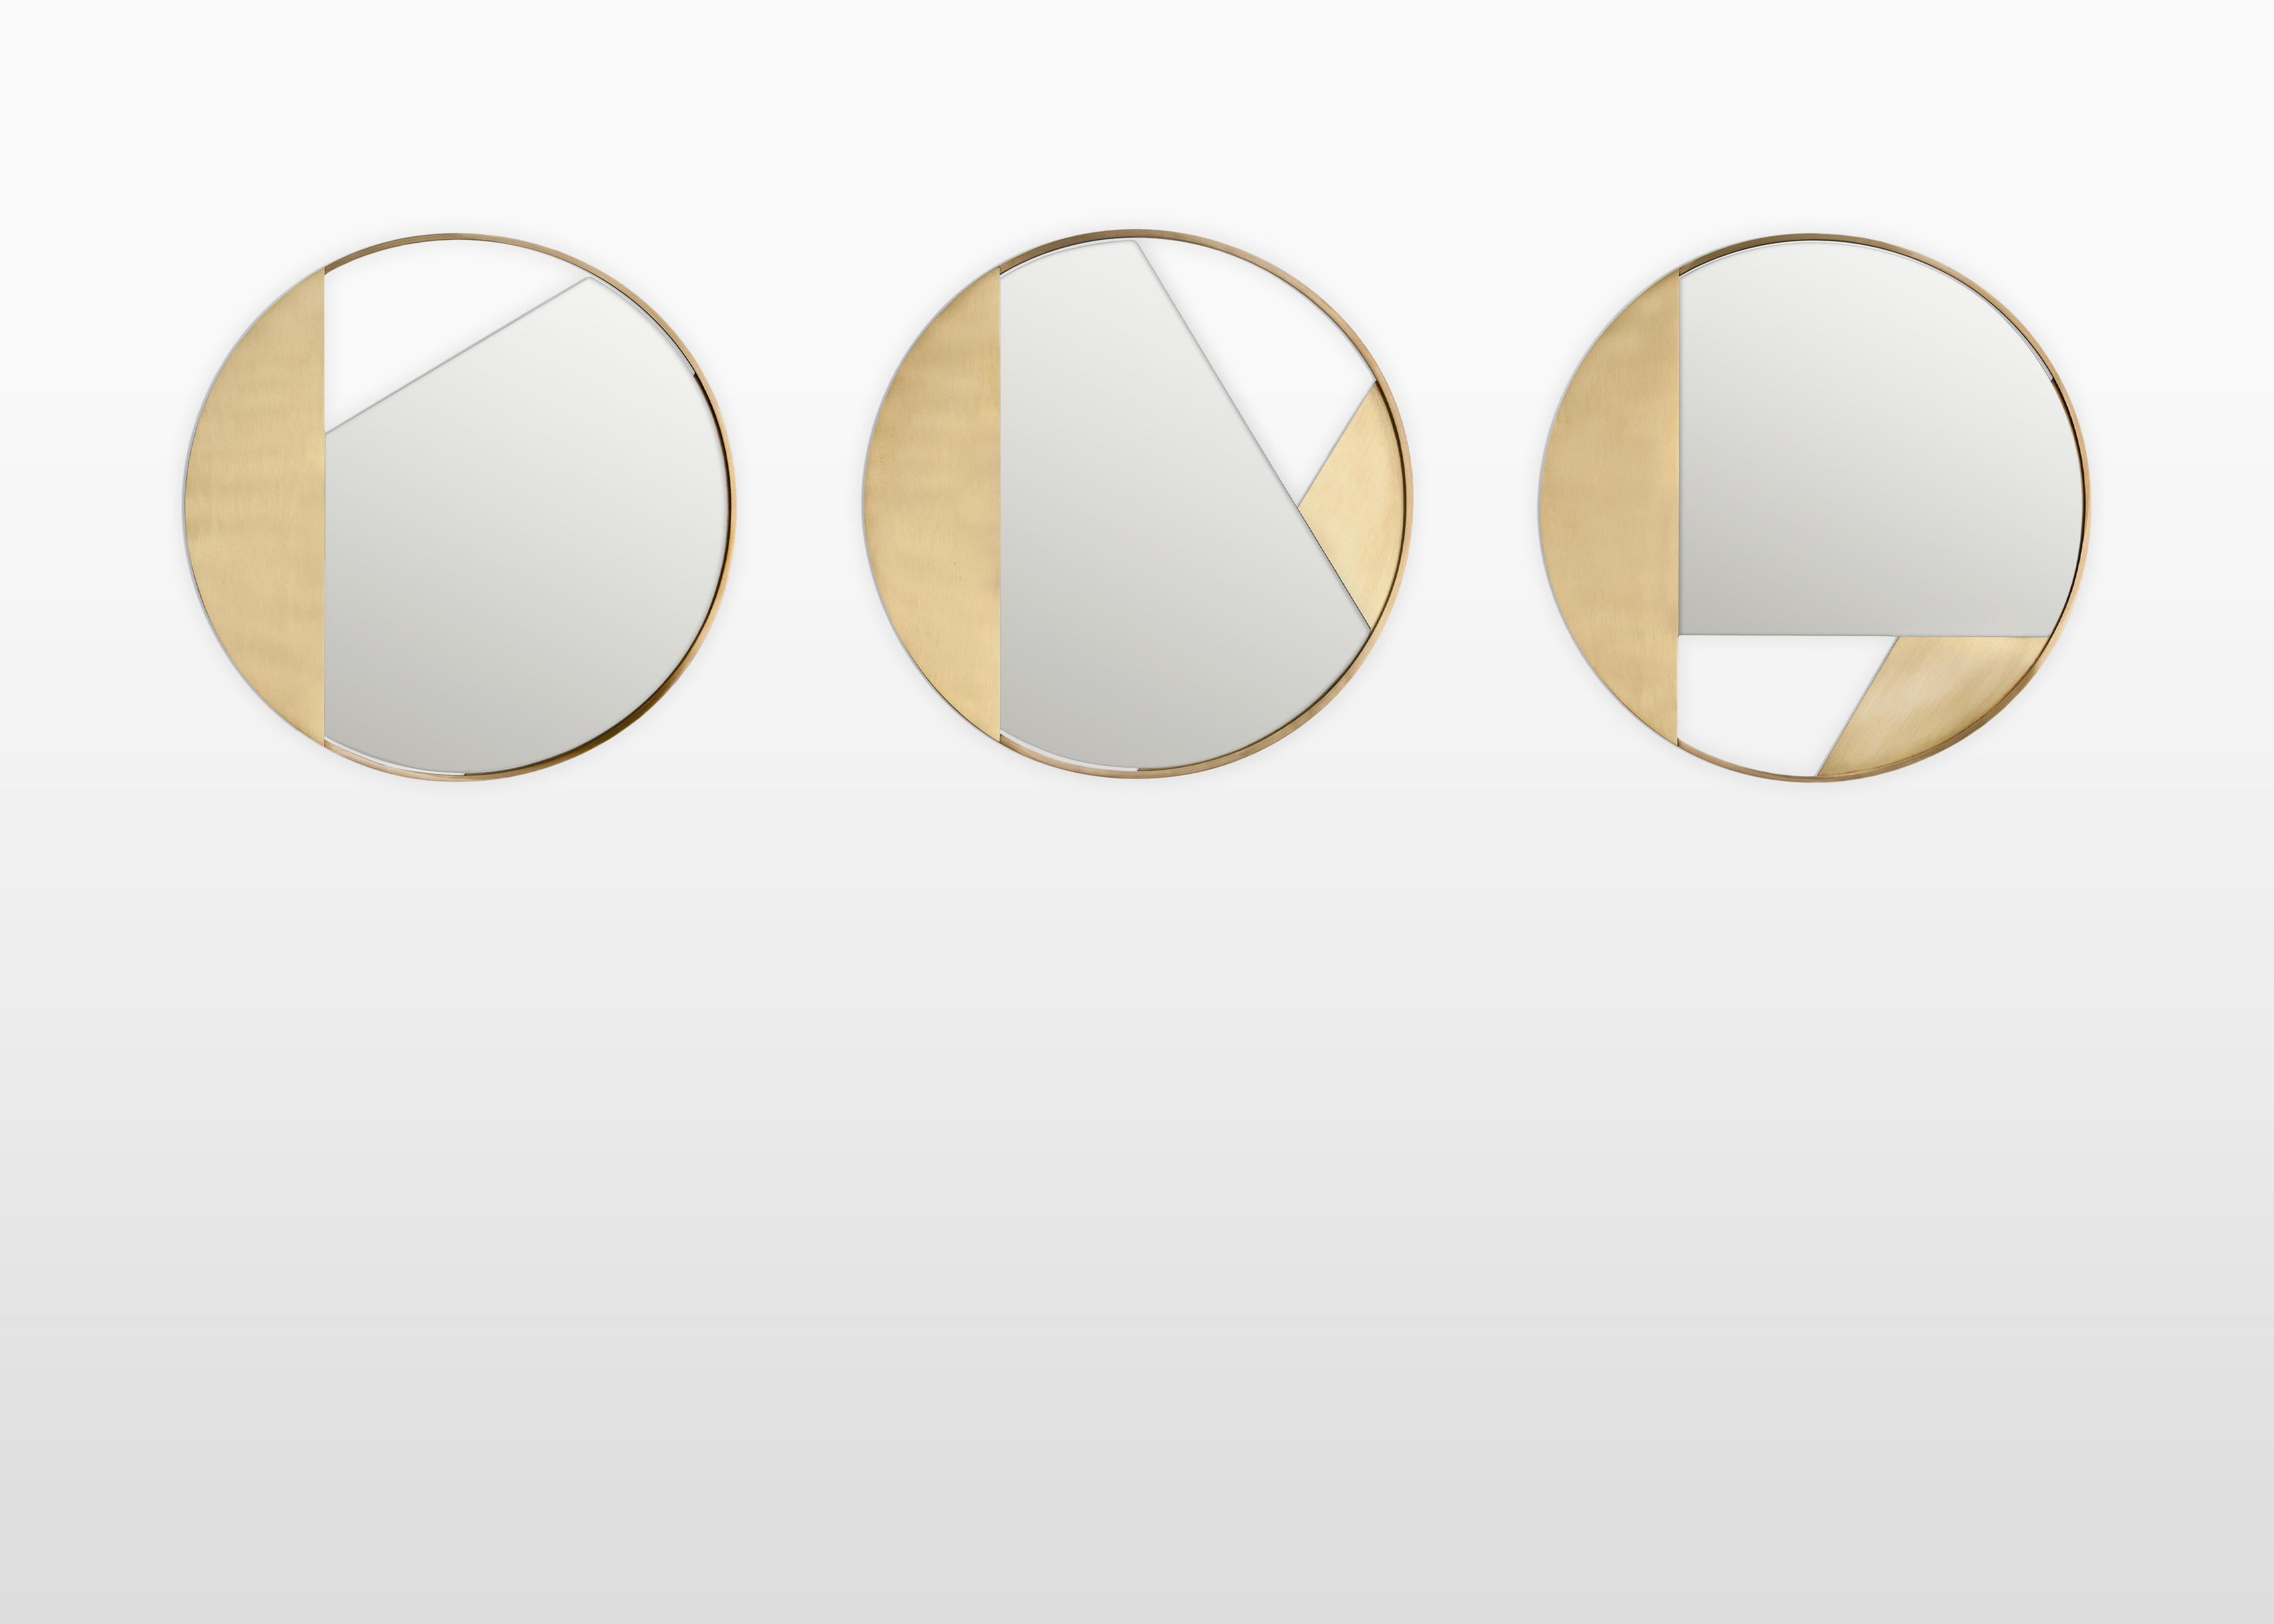 Set of 3 brass edition Mirror by Edizione Limitata
Limited Edition of 1000 pieces. Signed and numbered.
Designers: Simone Fanciullacci
Dimensions: Ø 90 cm
Materials: Brushed brass, mirror

Edizione Limitata, that is to say “Limited Edition”, is a